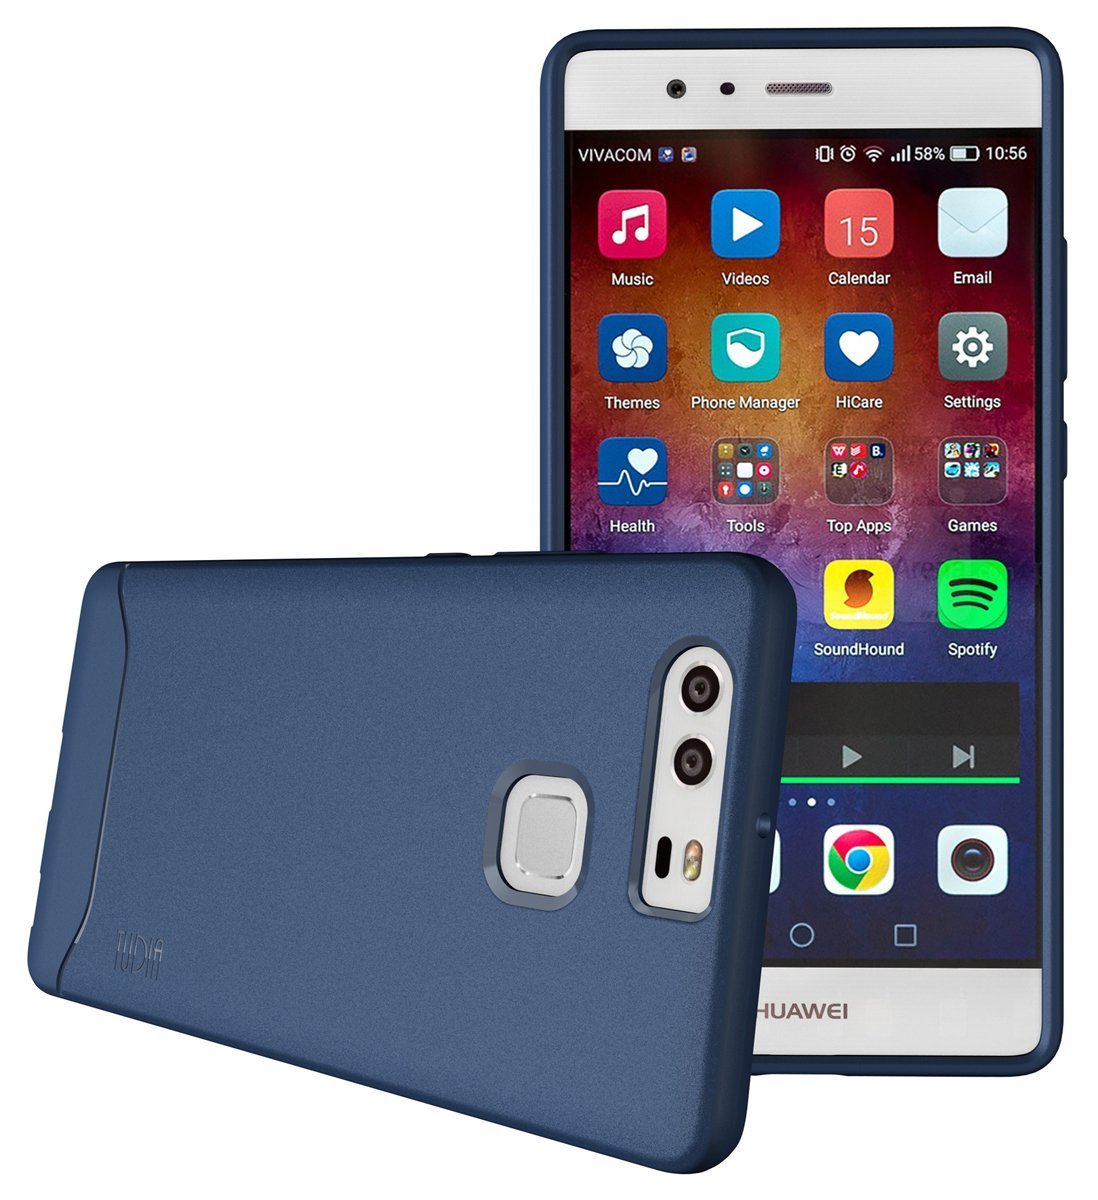 TUDIA Arch TPU Bumper Case for Huawei P9 - blue side front